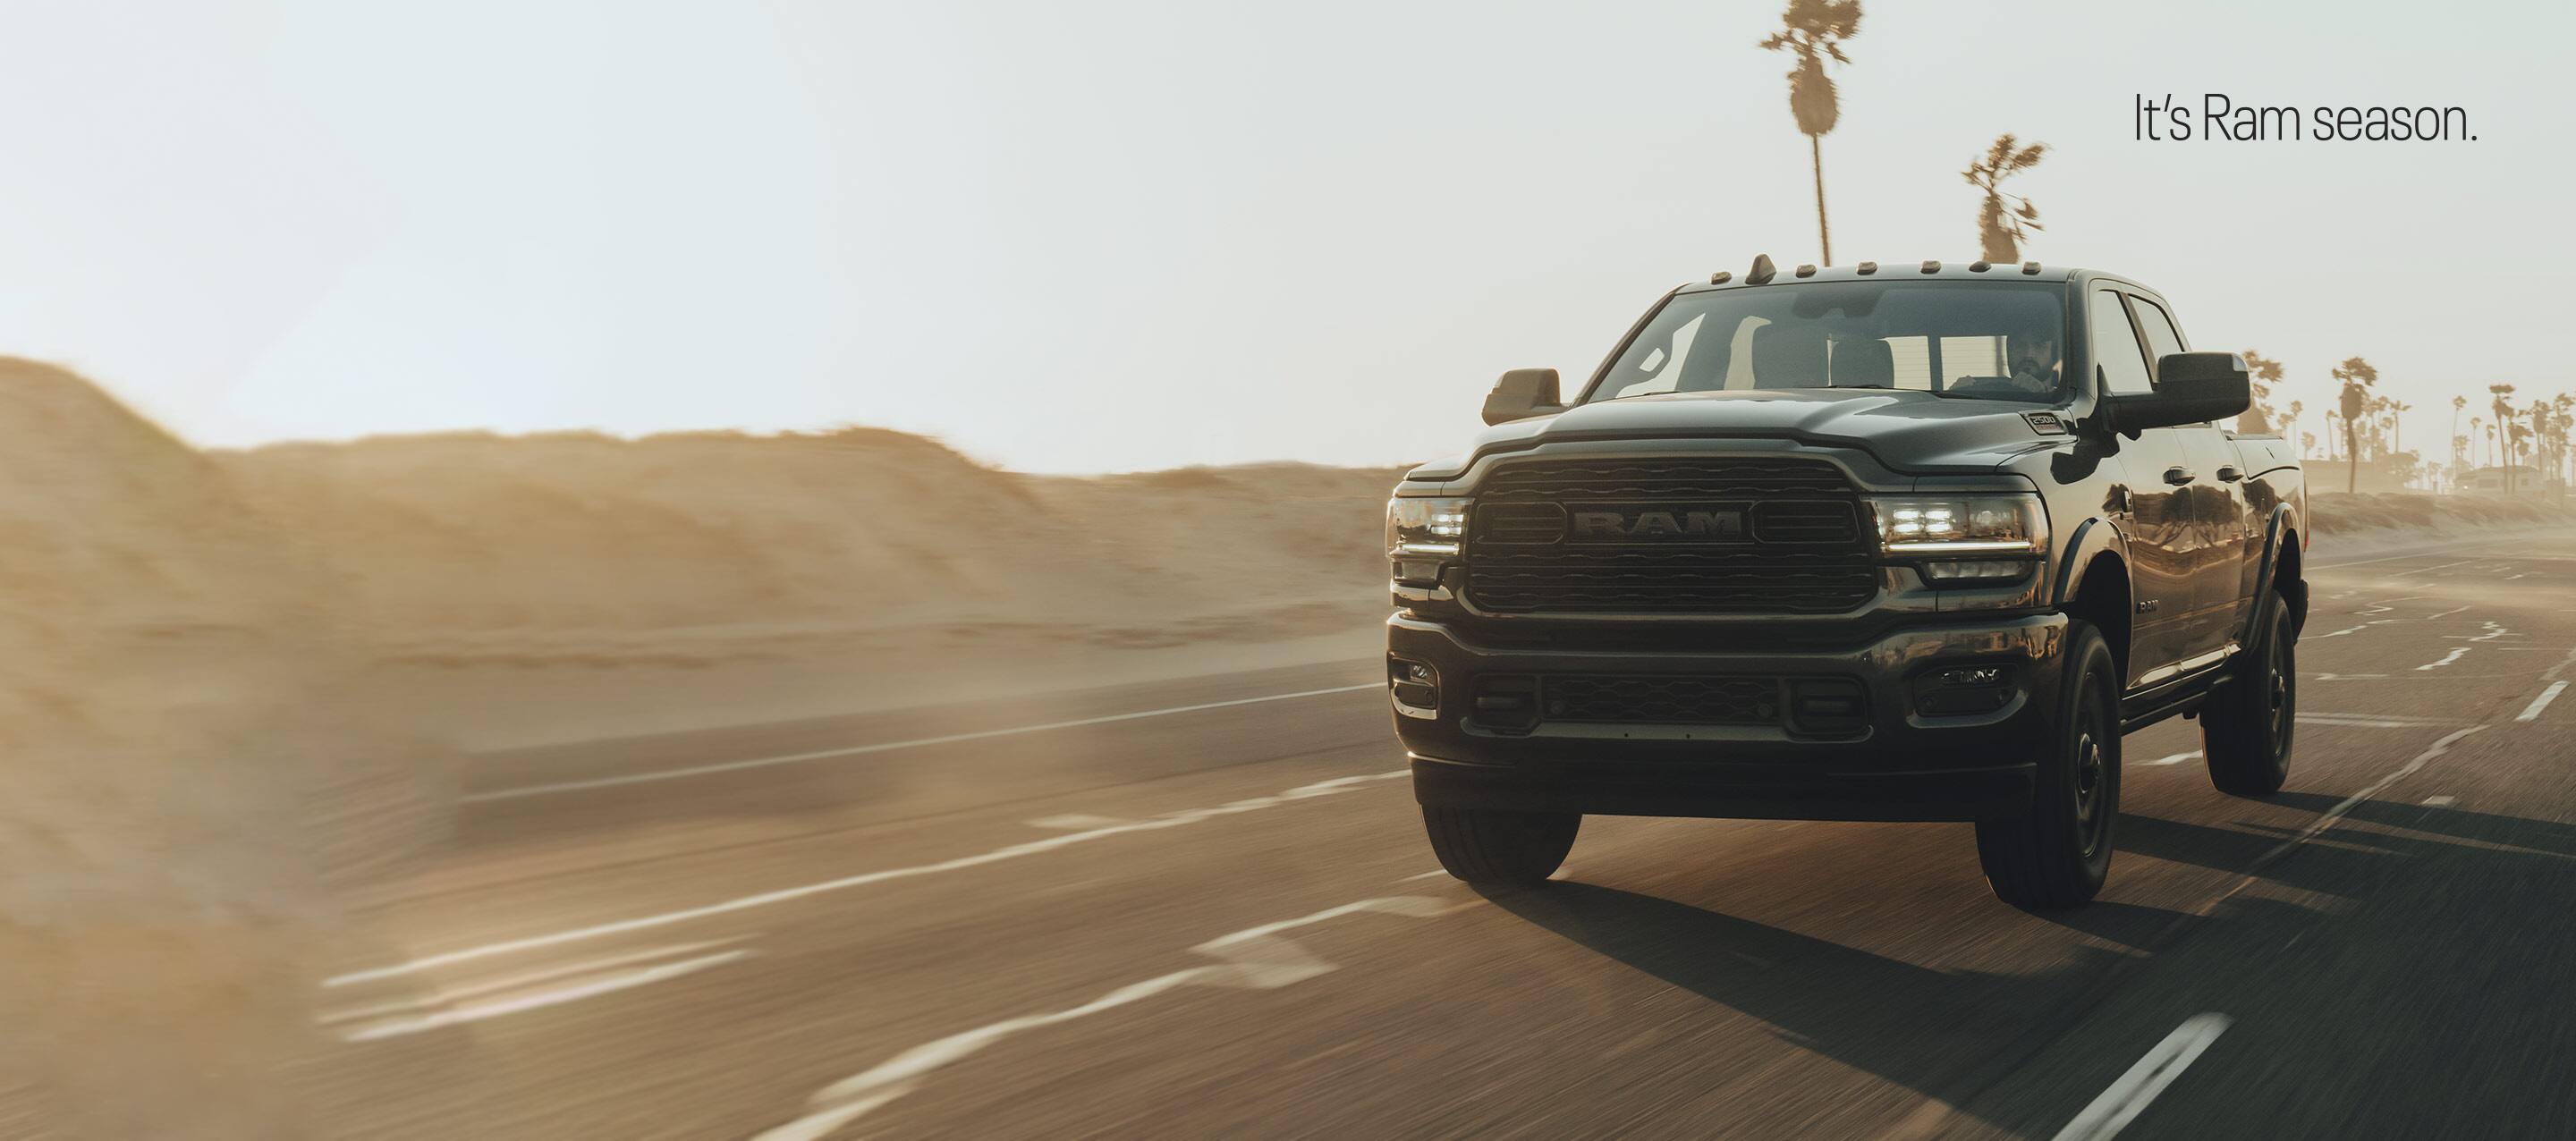 A 2022 Ram 2500 Limited 4x4 Crew Cab being driven on a highway with sand hills and palm trees in the background. It's Ram Season.